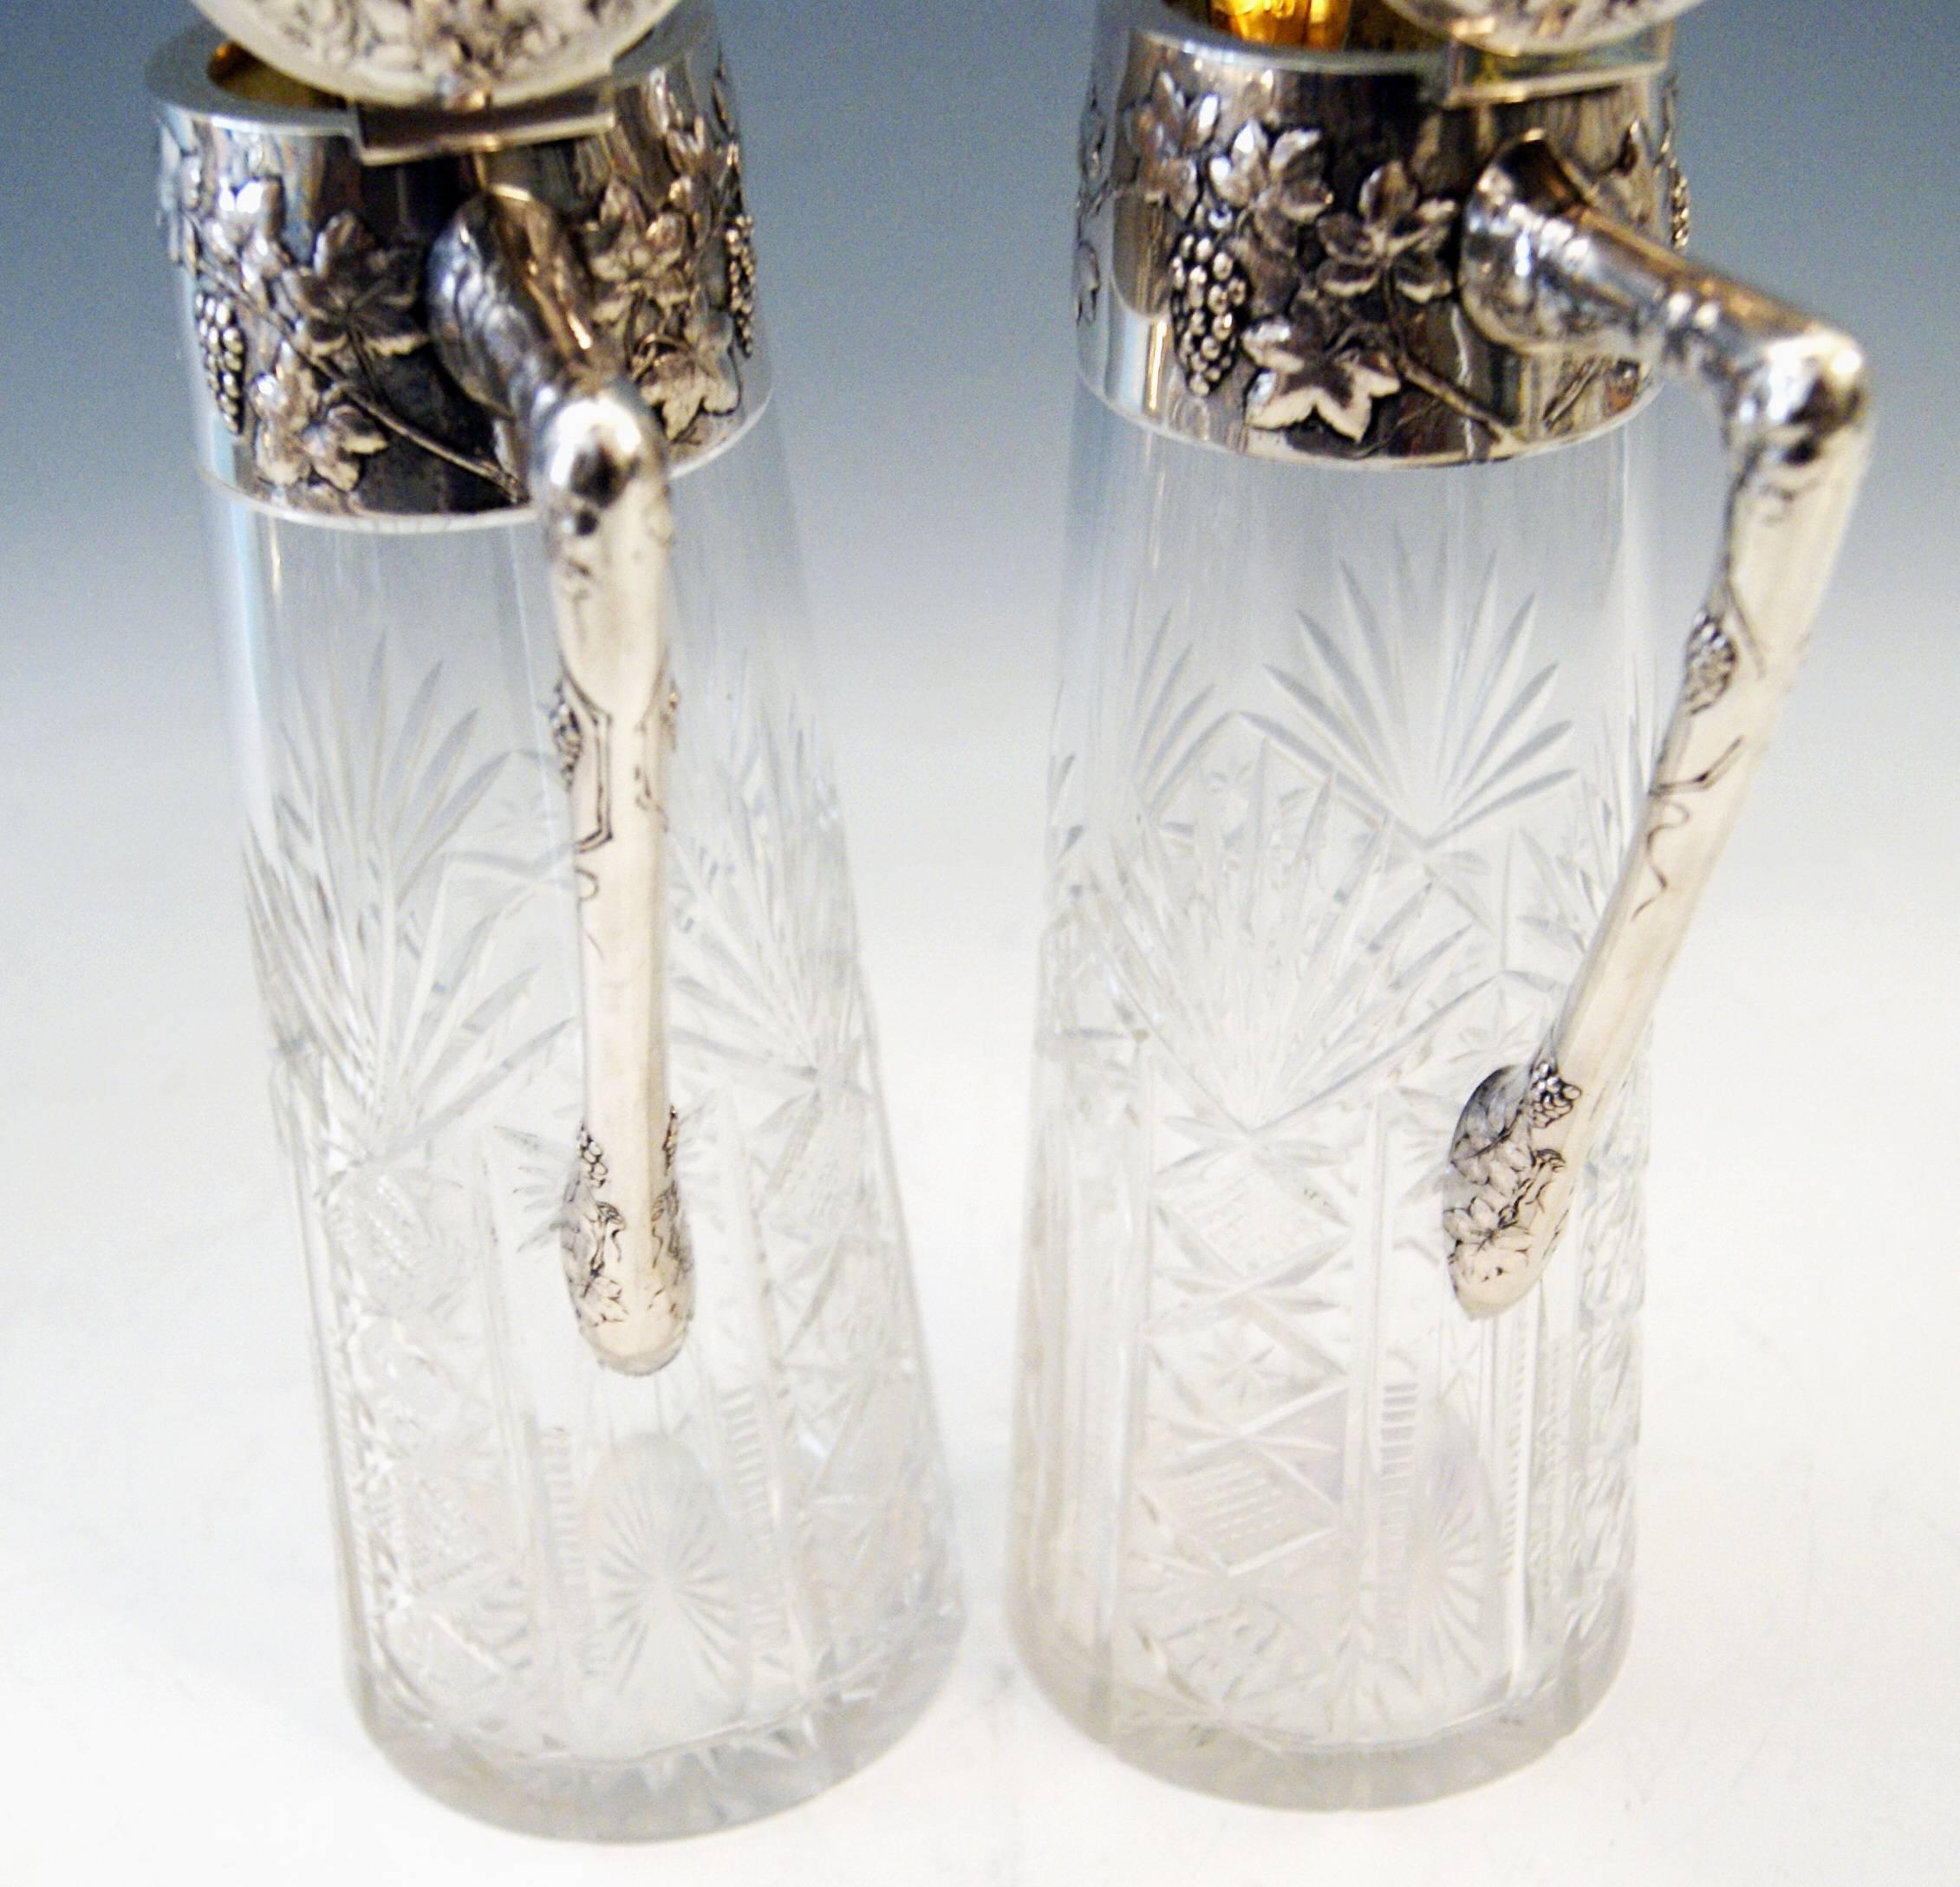  Silver Austria Viennese Pair of Glass Decanters Carafes, circa 1900 1